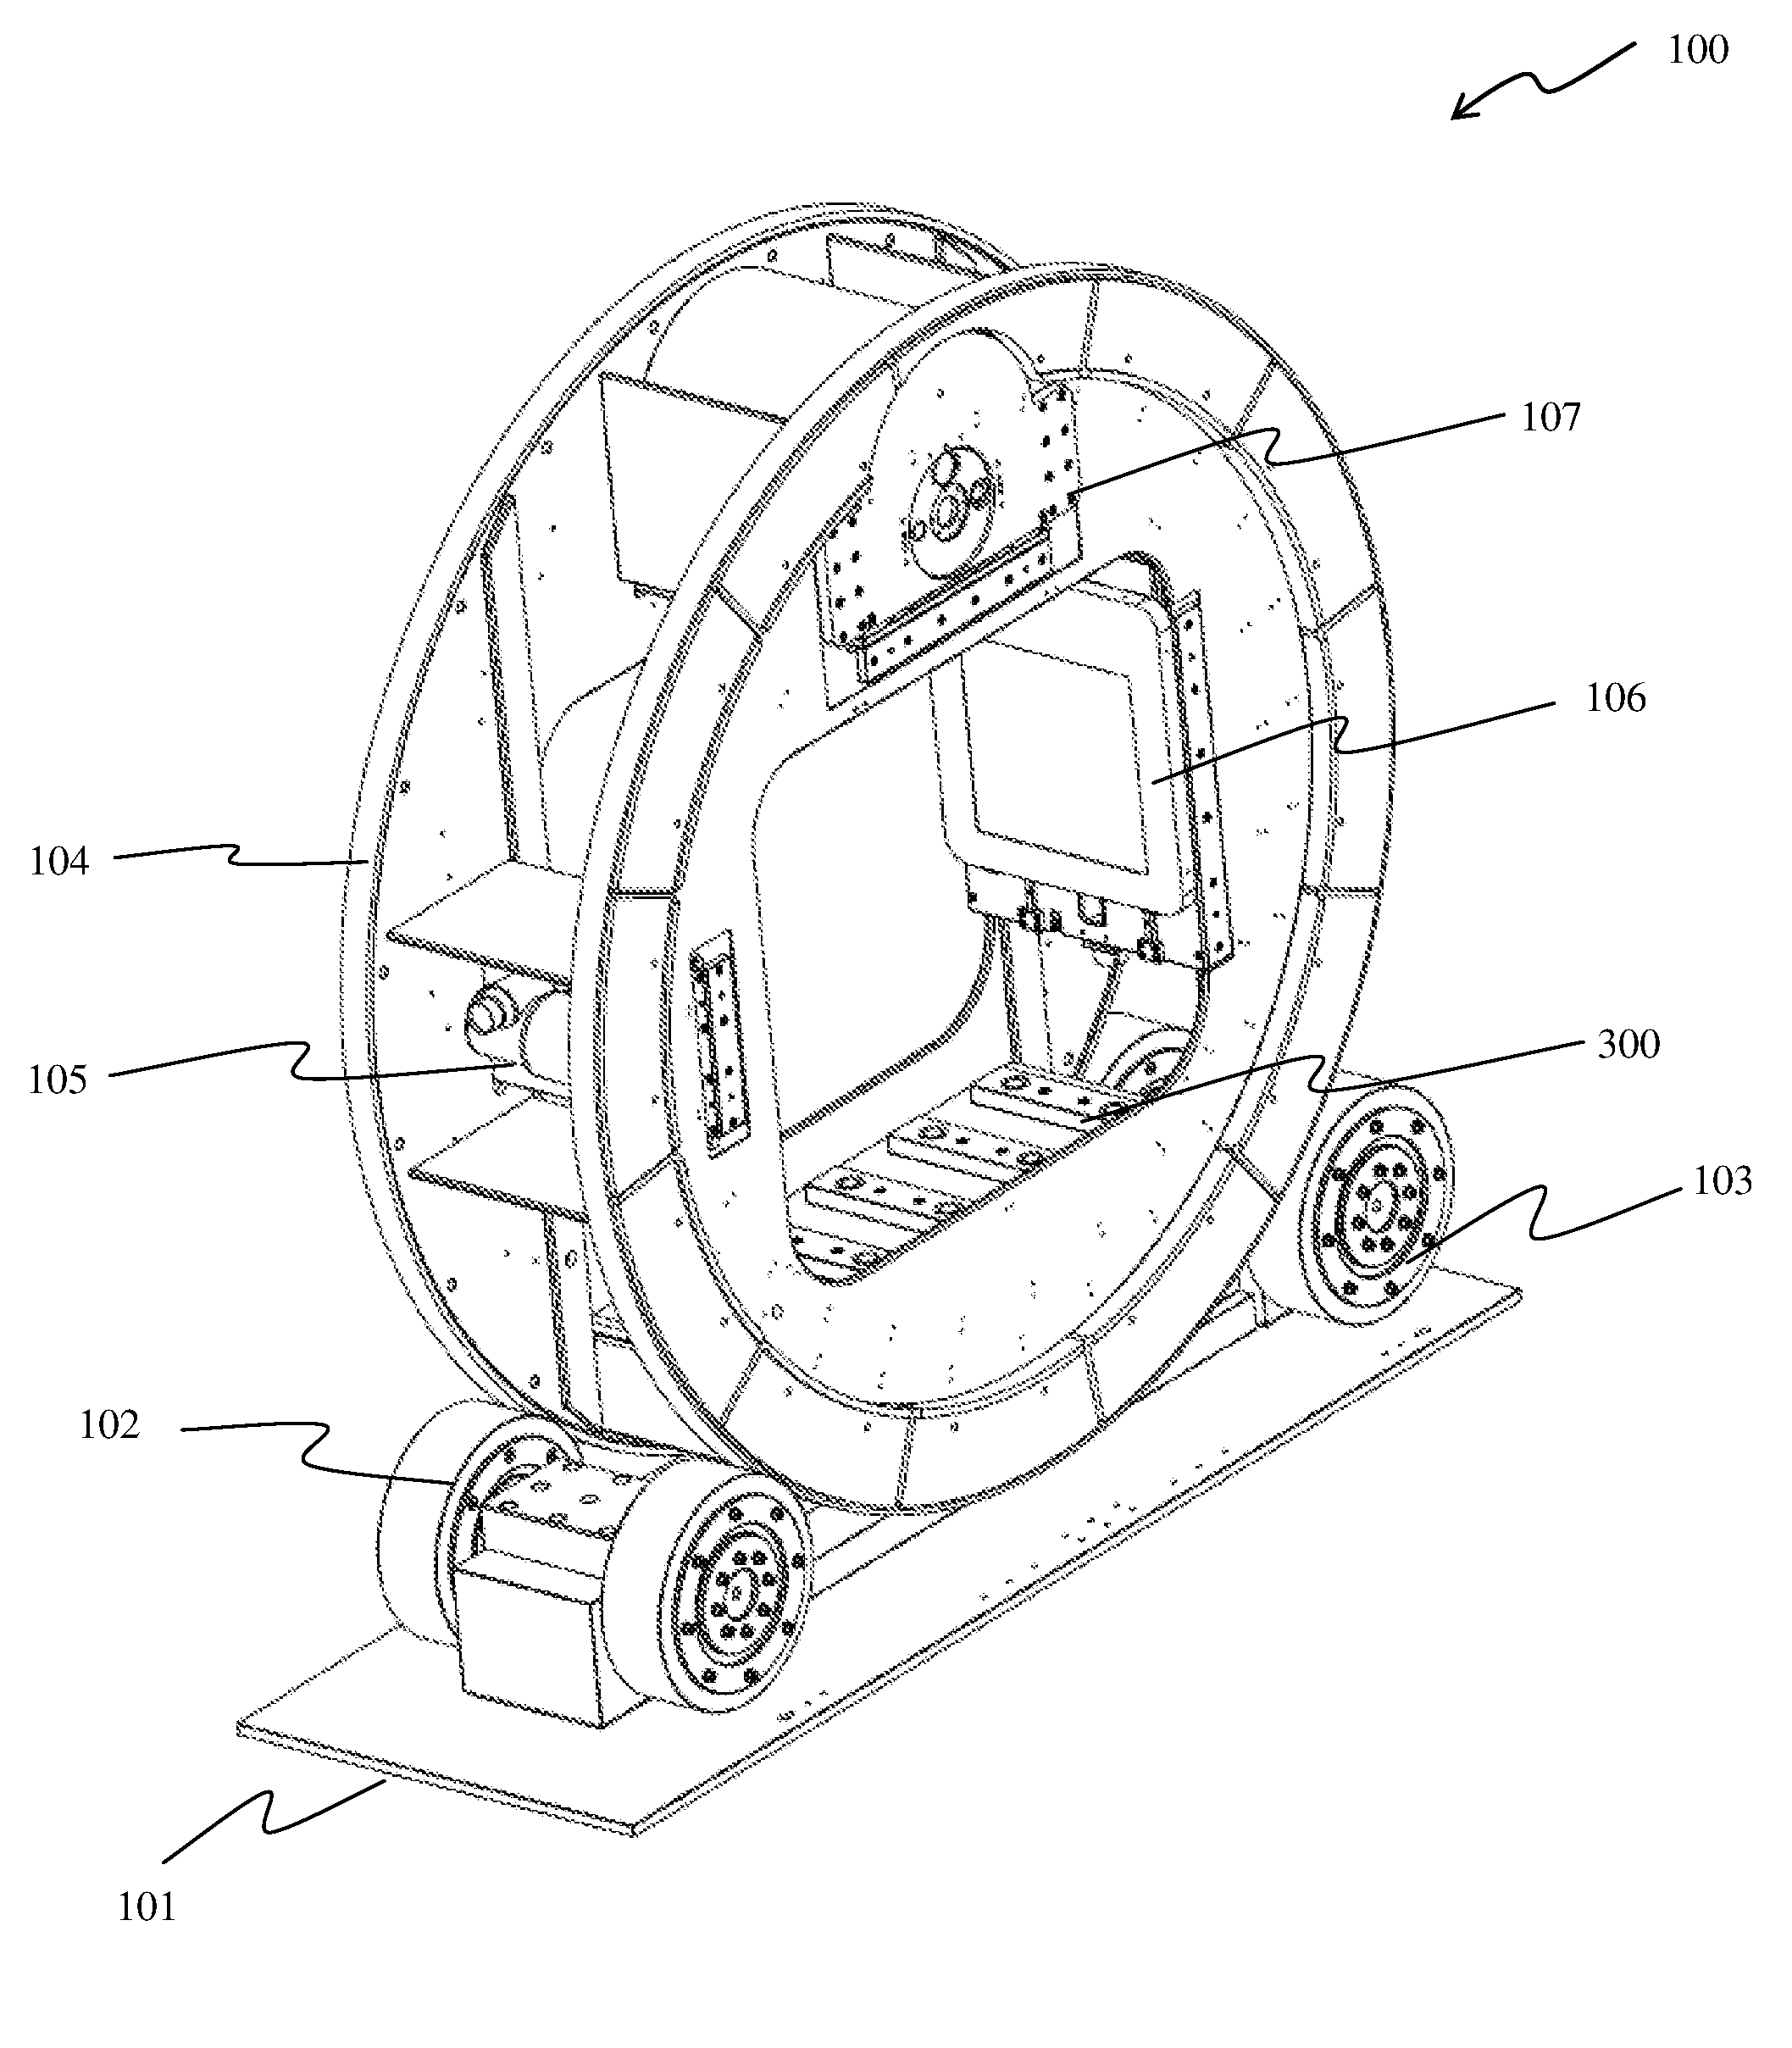 An apparatus to deliver conformal radiotherapy using external beam cobalt 60